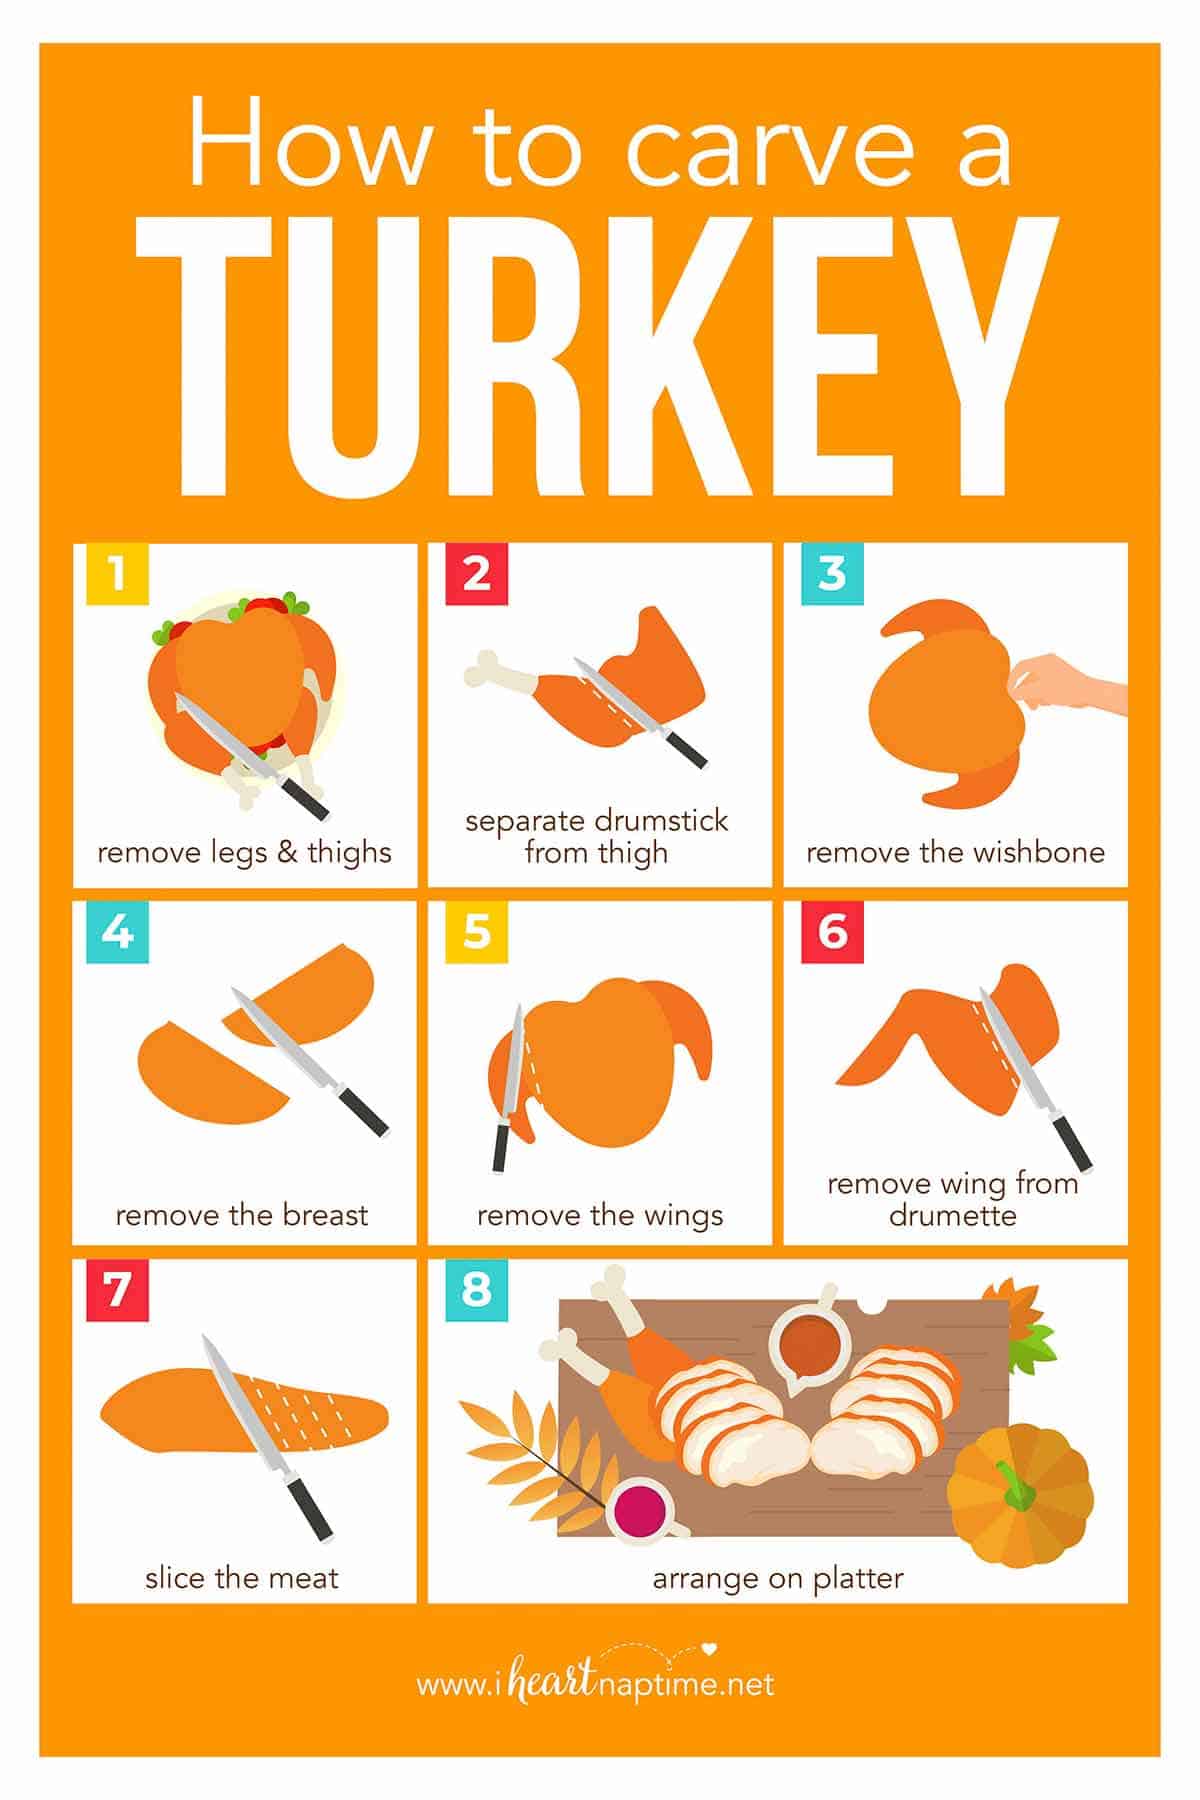 How to carve a turkey chart.